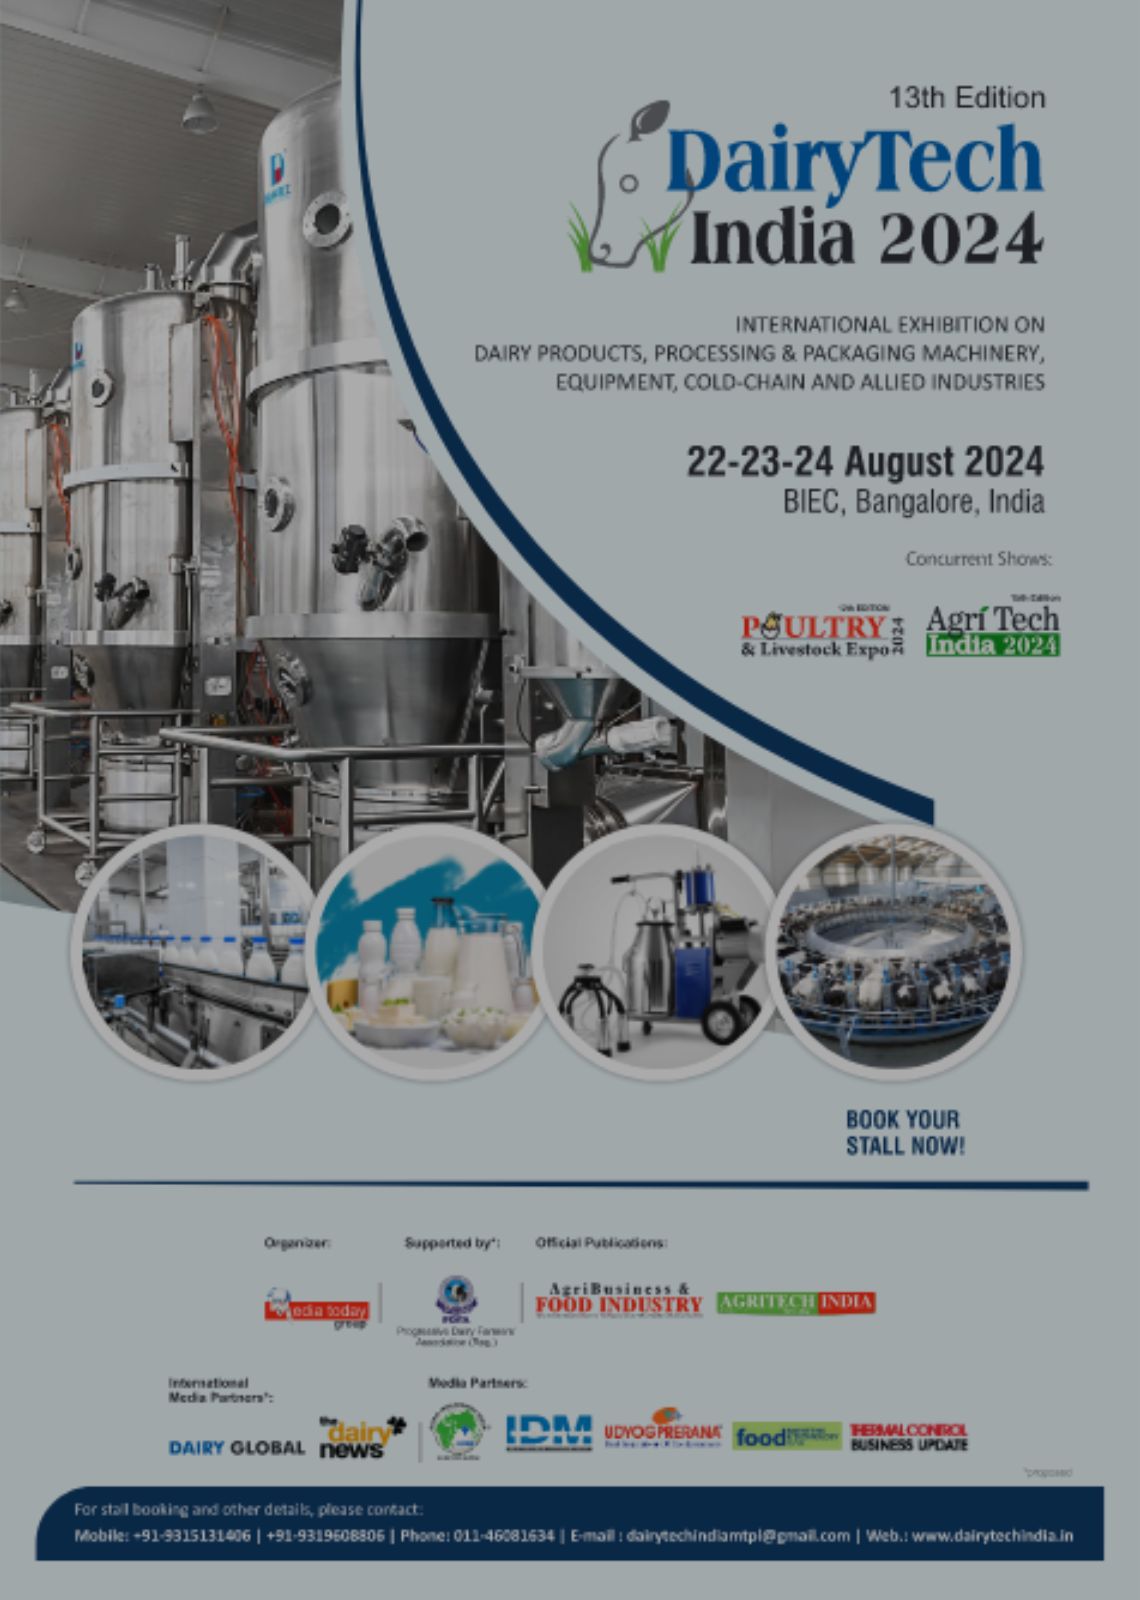 GIBF Collabrative Upcoming Event -   Dairy Tech India 2024